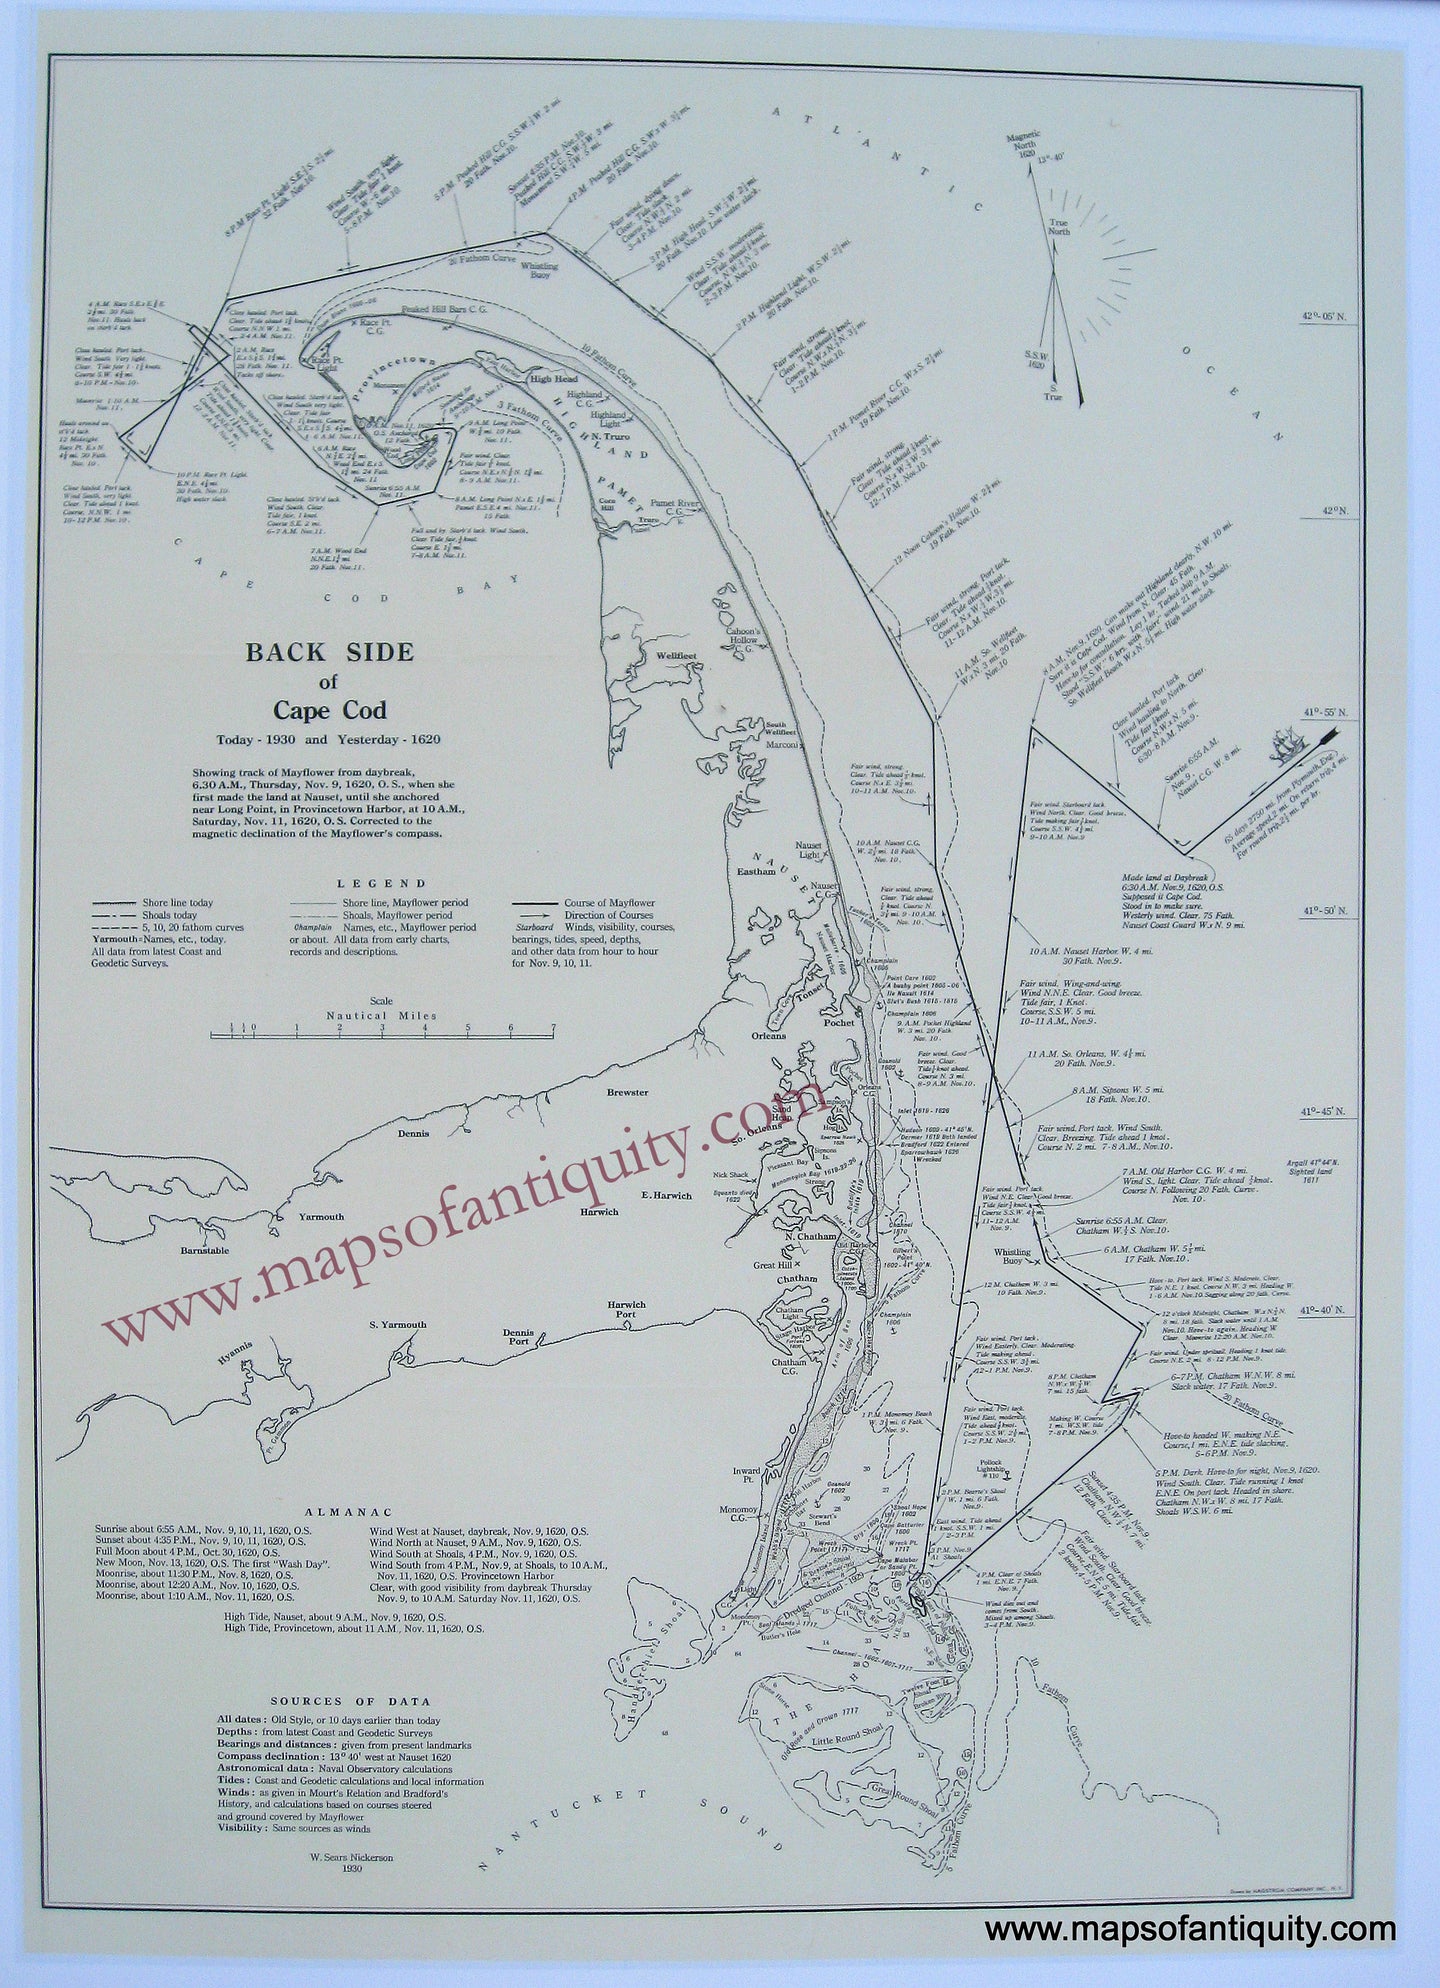 Reproduction-Back-Side-of-Cape-Cod-Today-1930-and-Yesterday-1620:-Mayflower-First-Landing-in-America---Reproduction---Reproduction--Reproduction-Reproduction-of-Warren-Sears-Nickerson's-1931-Map-Maps-Of-Antiquity